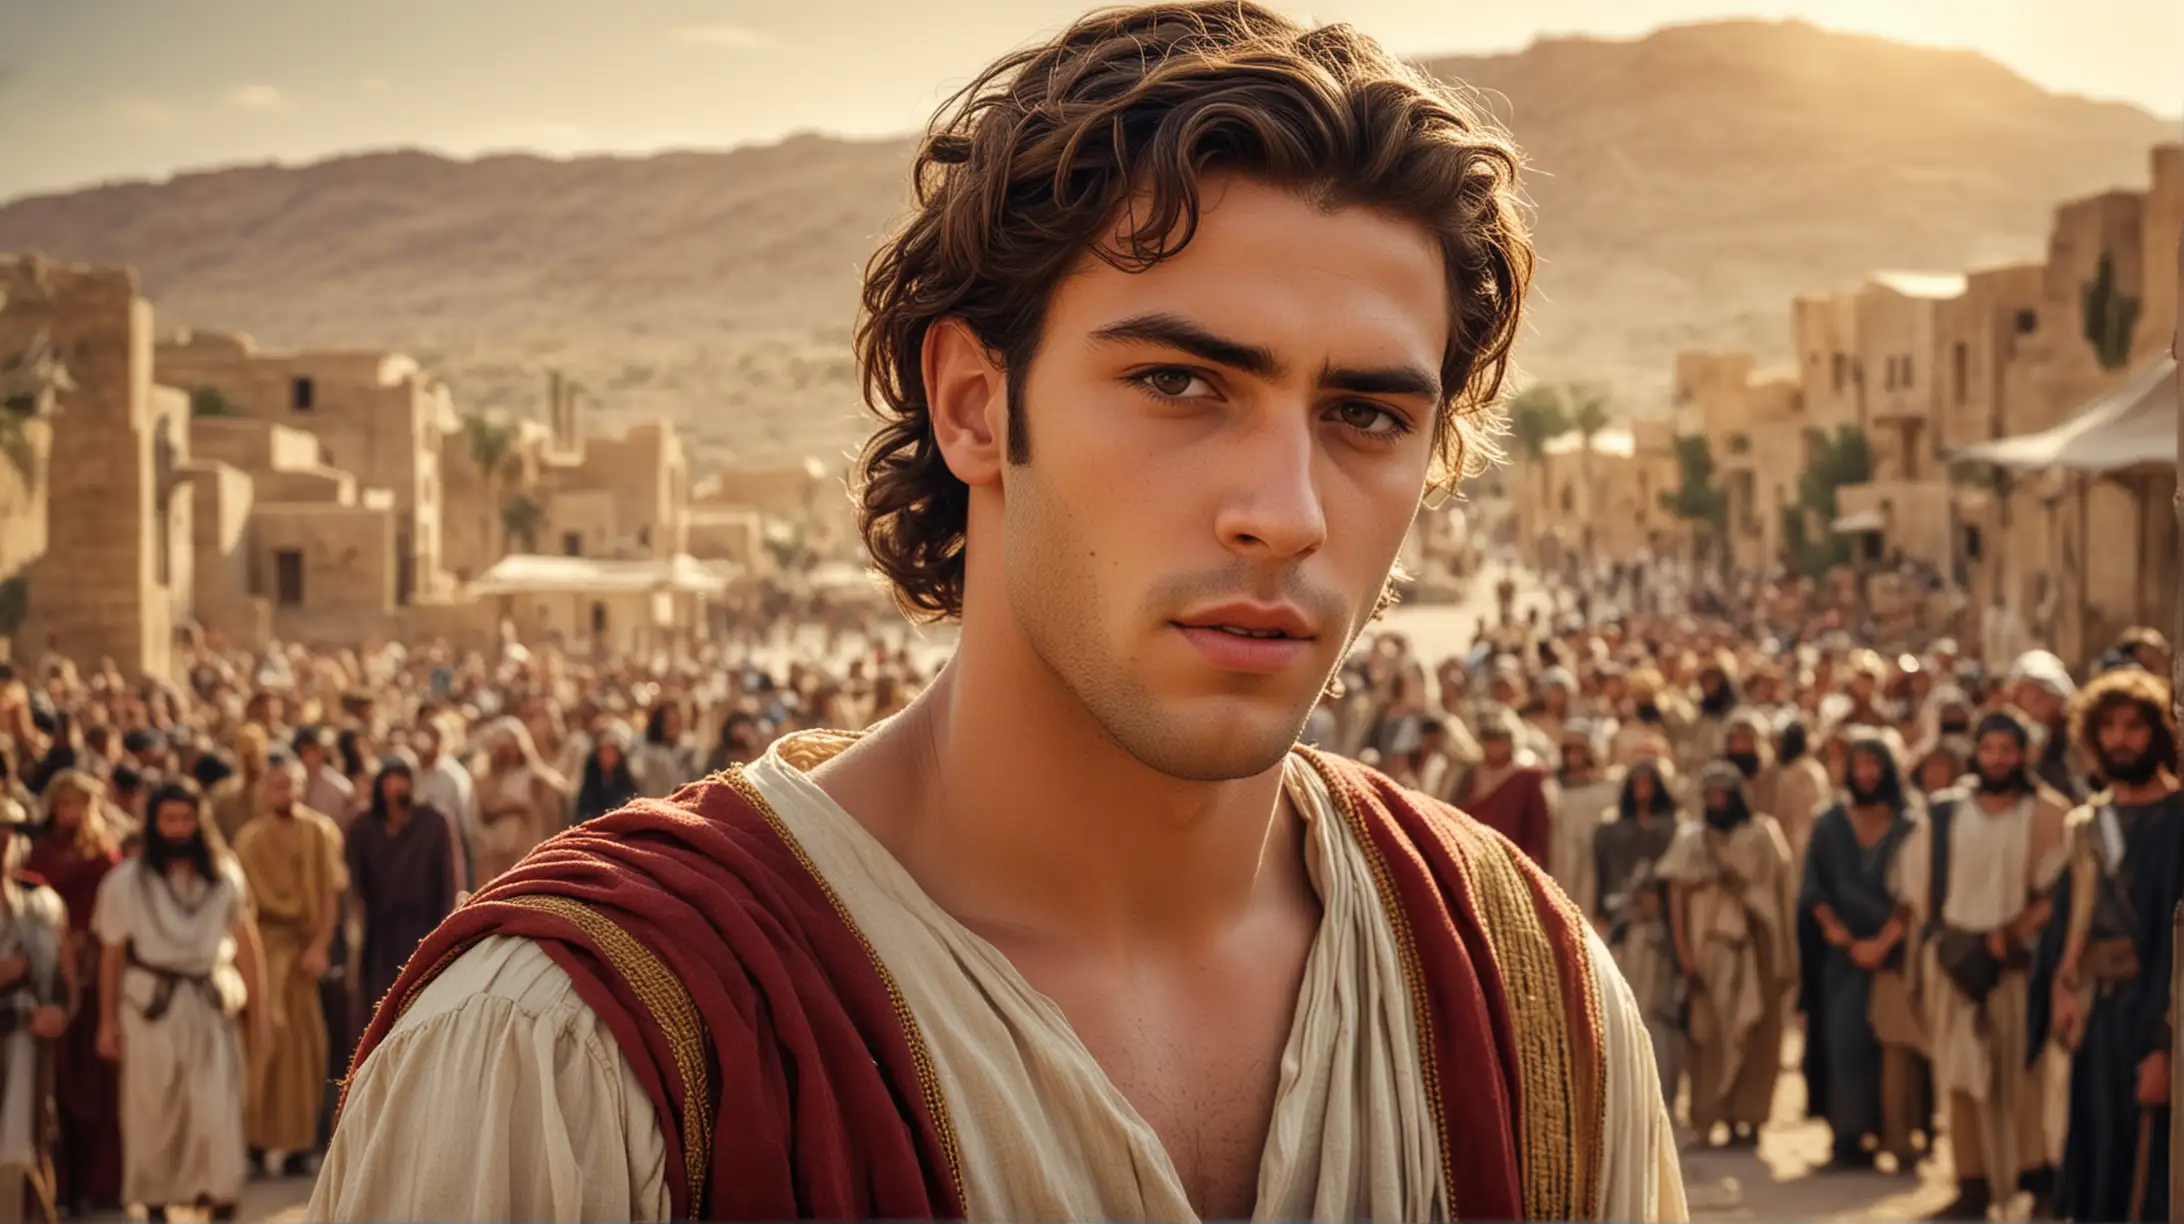 a young handsome King Solomon, with a few men in the background, in a desert city. During the biblical era of King David.